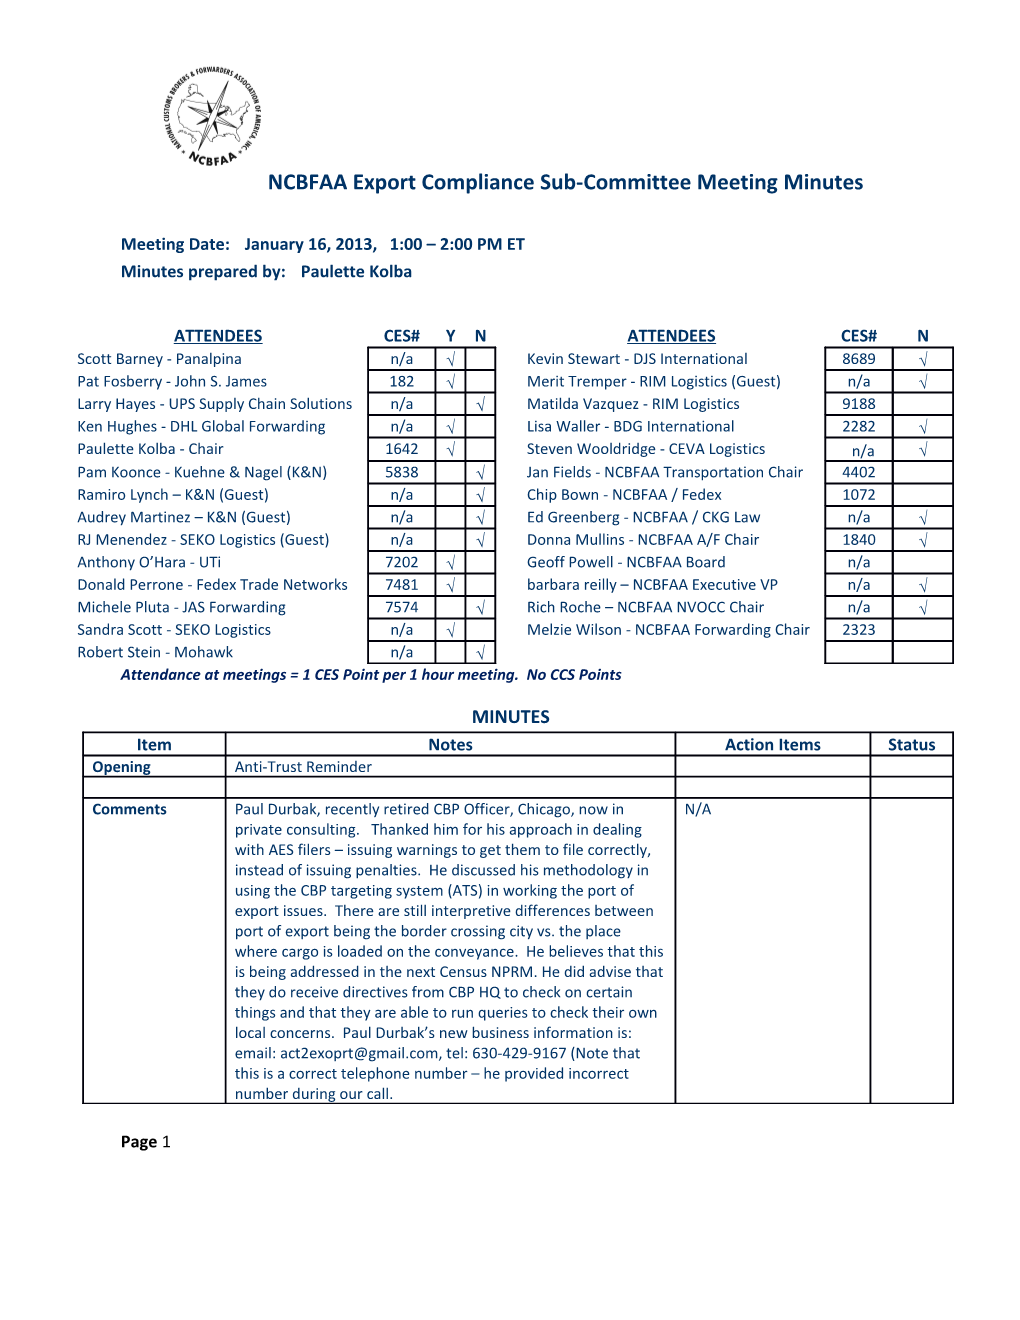 NCBFAA Export Compliance Sub-Committee Meeting Minutes